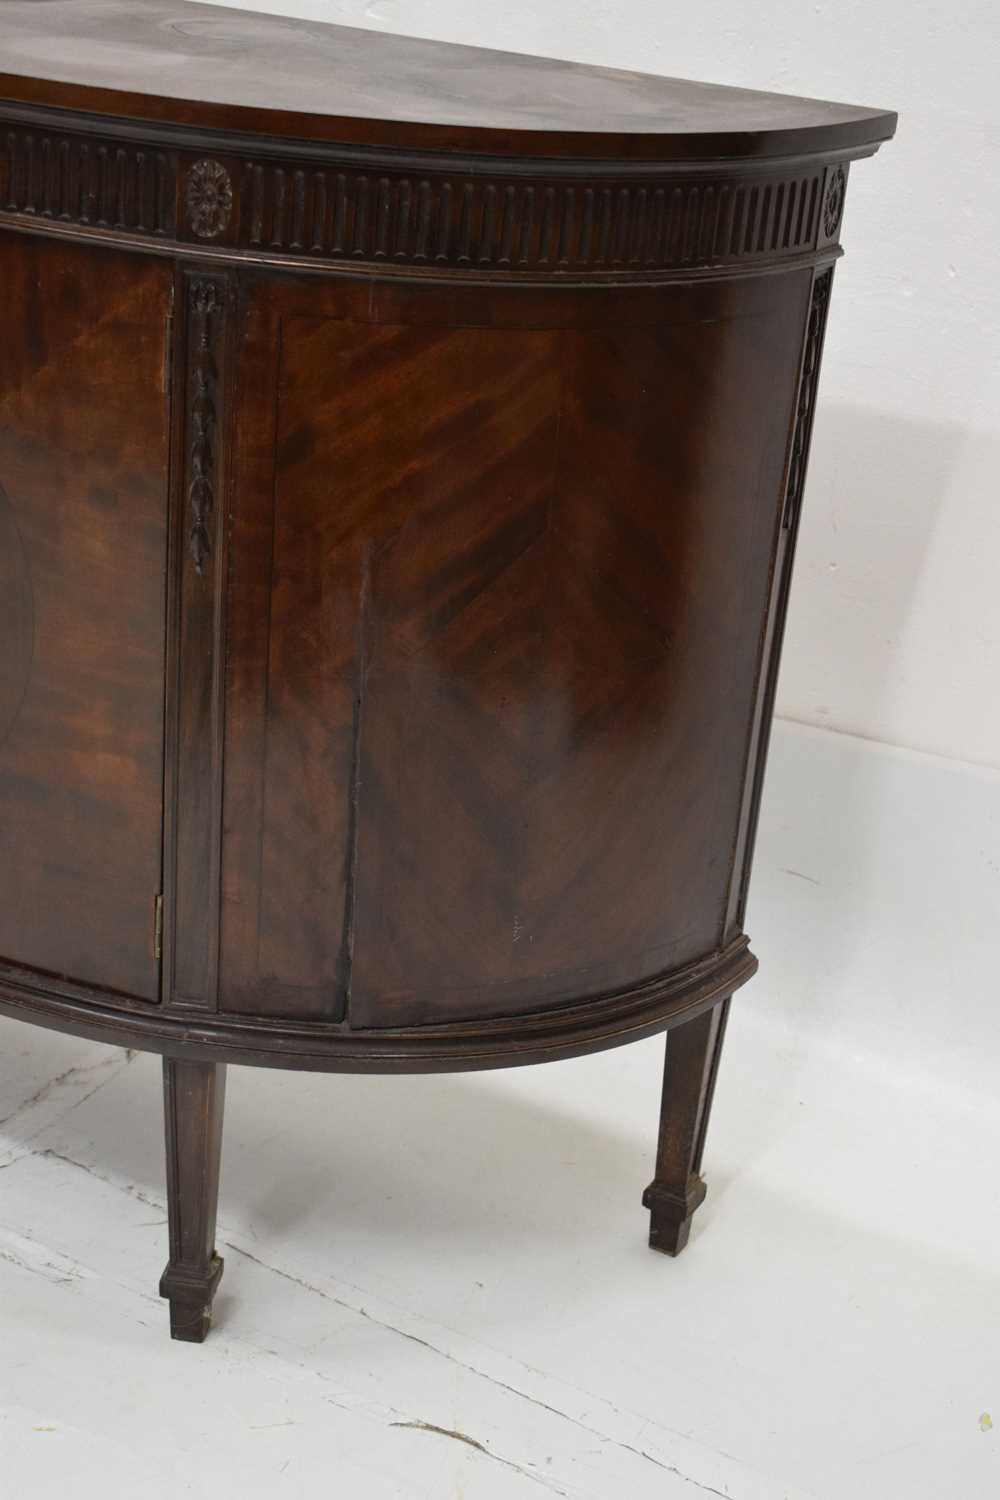 Pair of 1920s inlaid mahogany demi-lune side cabinets in the Adam Revival taste - Image 11 of 15